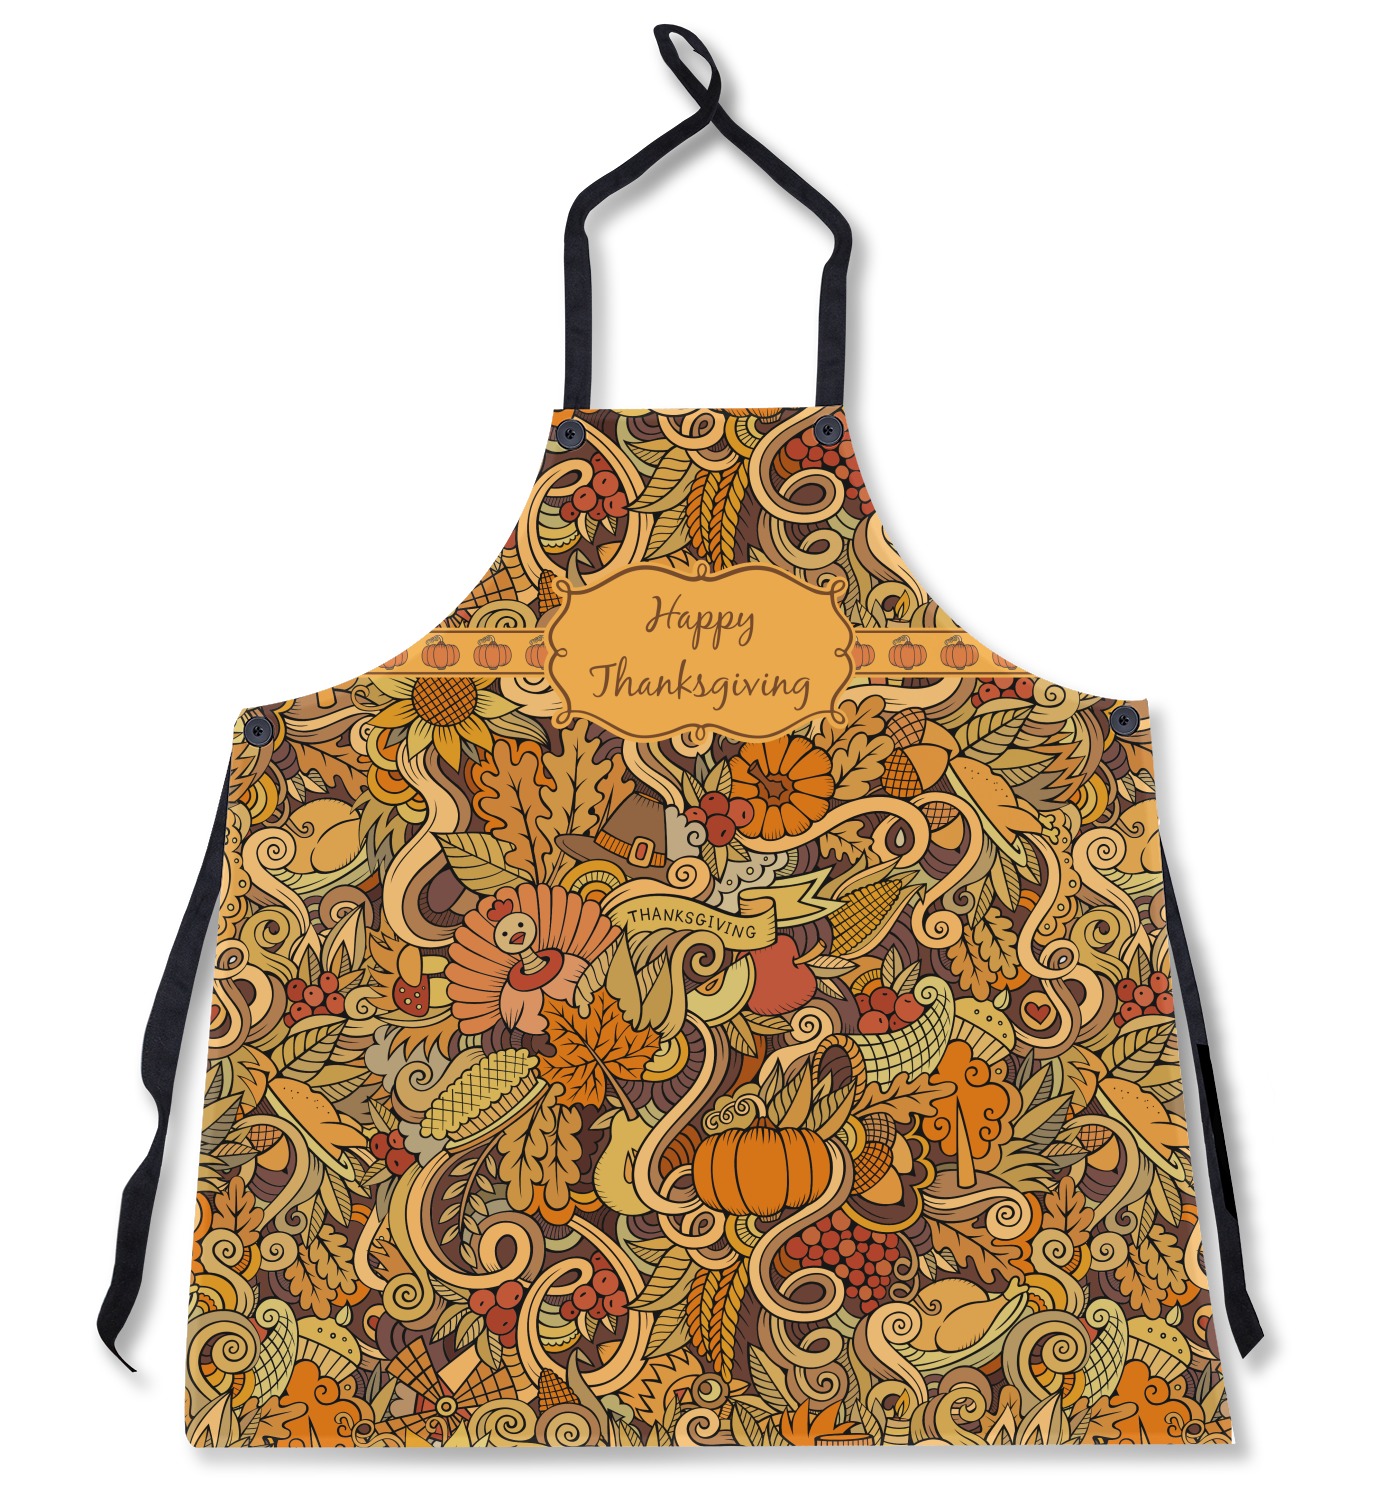 Thanksgiving Apron Without Pockets - YouCustomizeIt